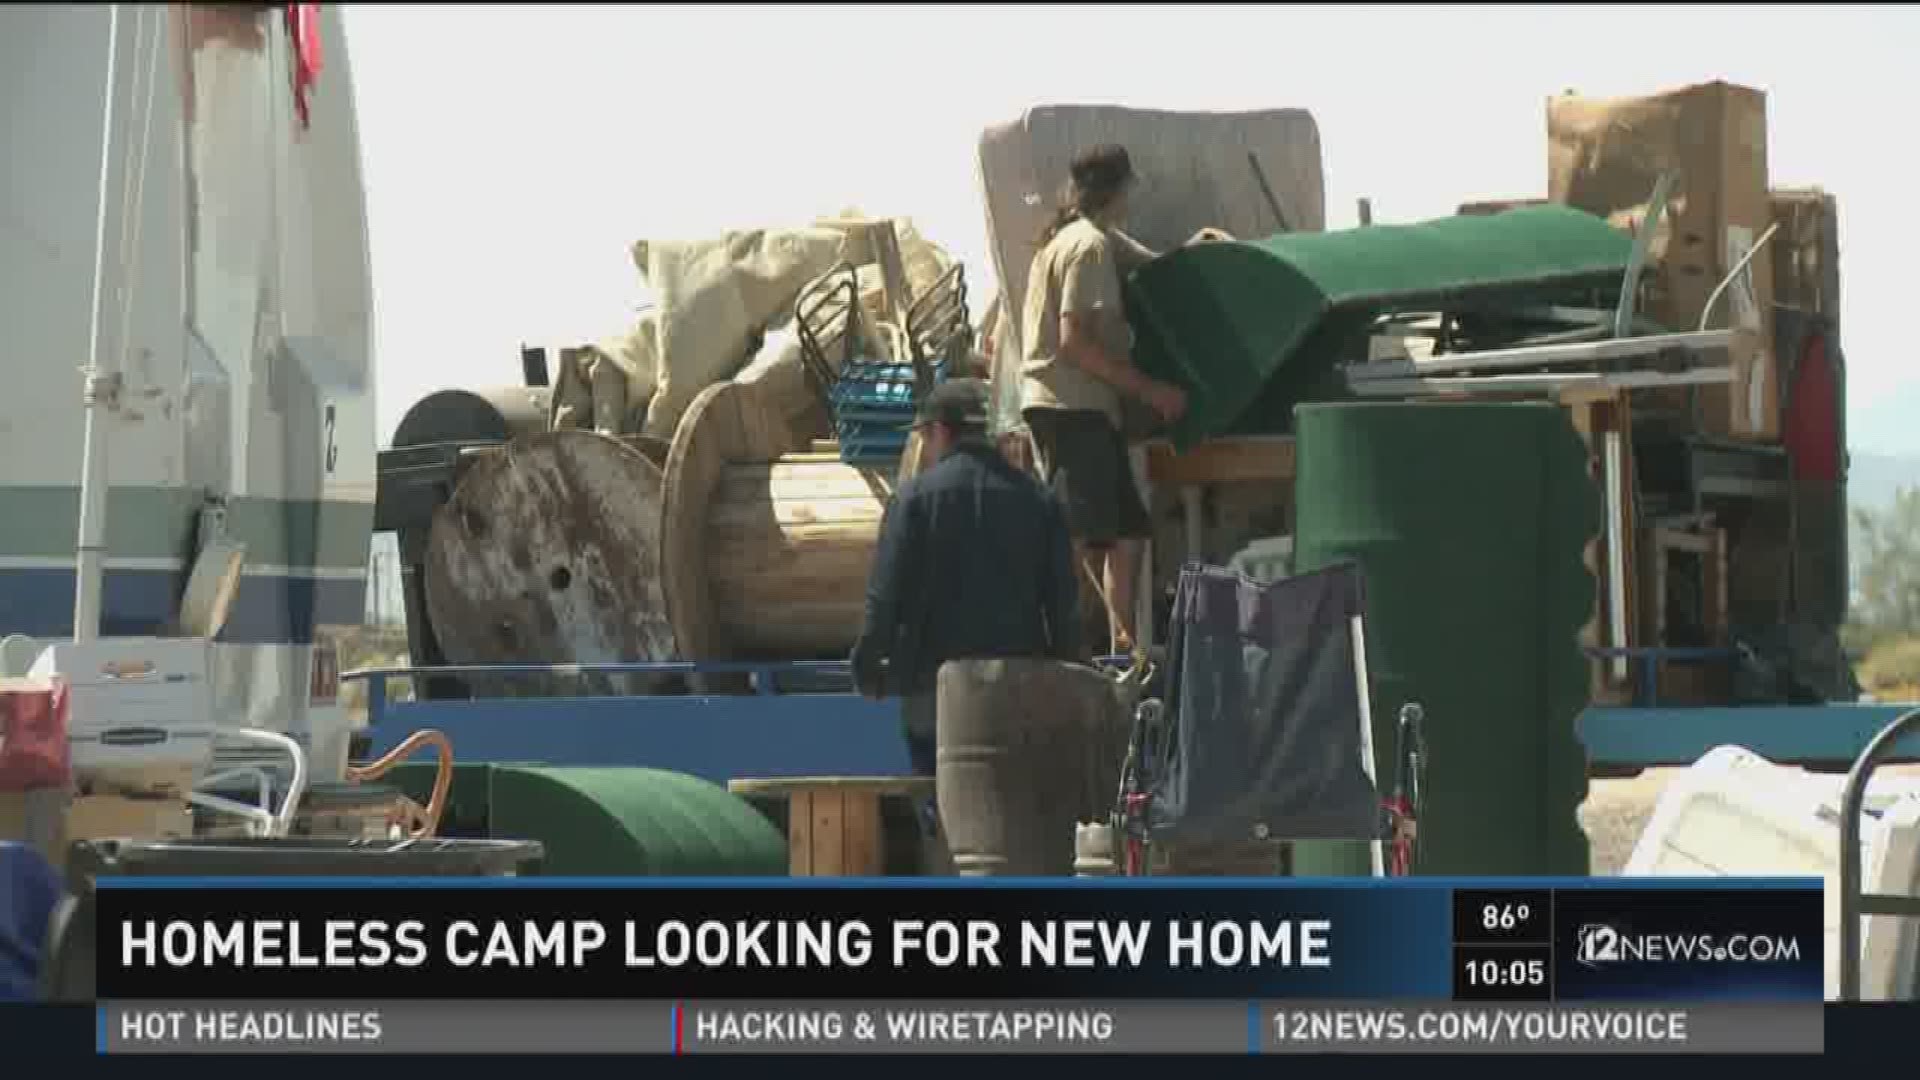 Homeless camp looking for new home